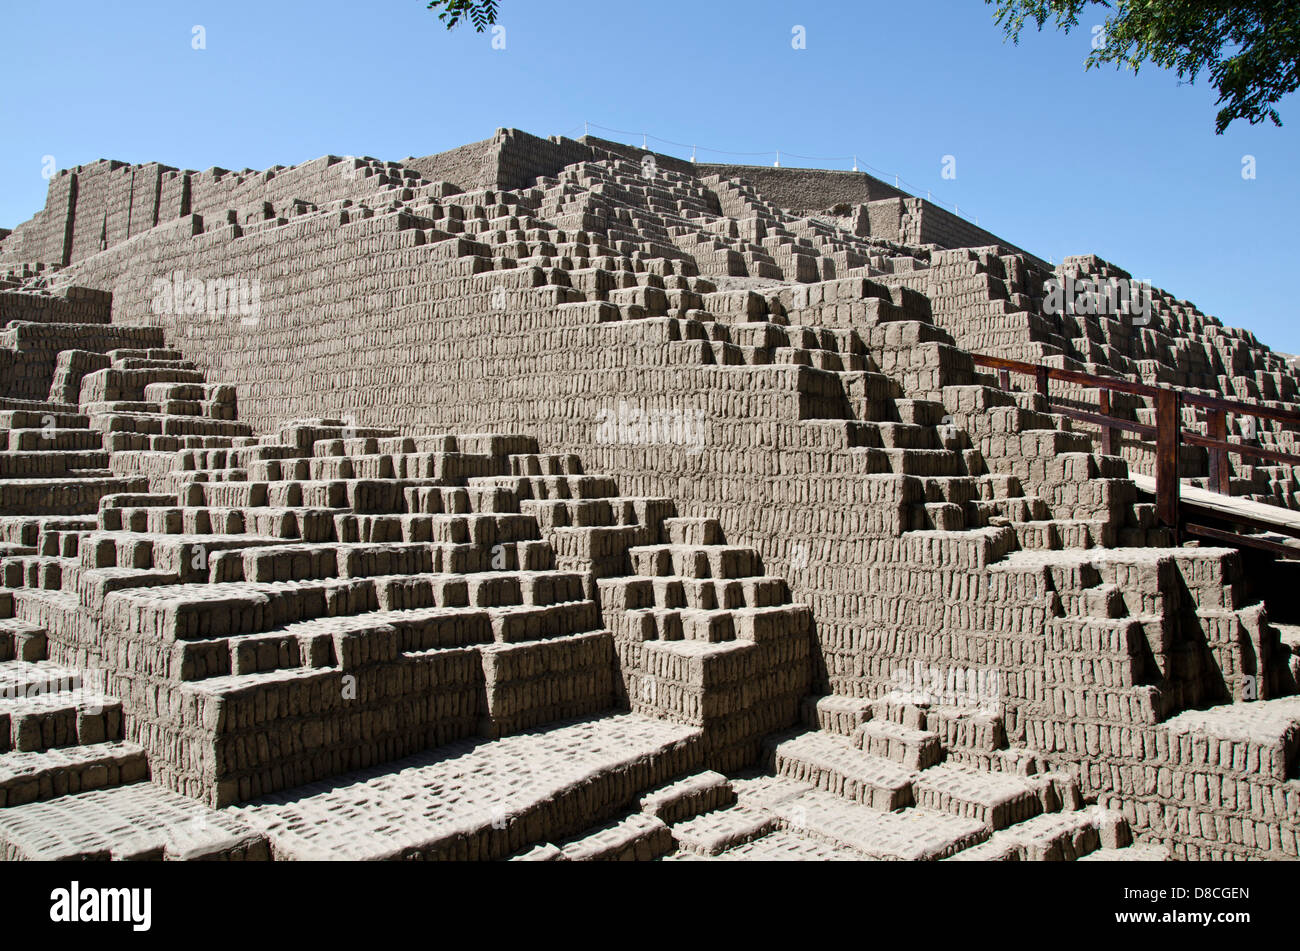 Huaca Pucllana. Lima culture 200 AD and 700 AD. Miraflores district. Lima city. Peru.Archaeological site. Stock Photo